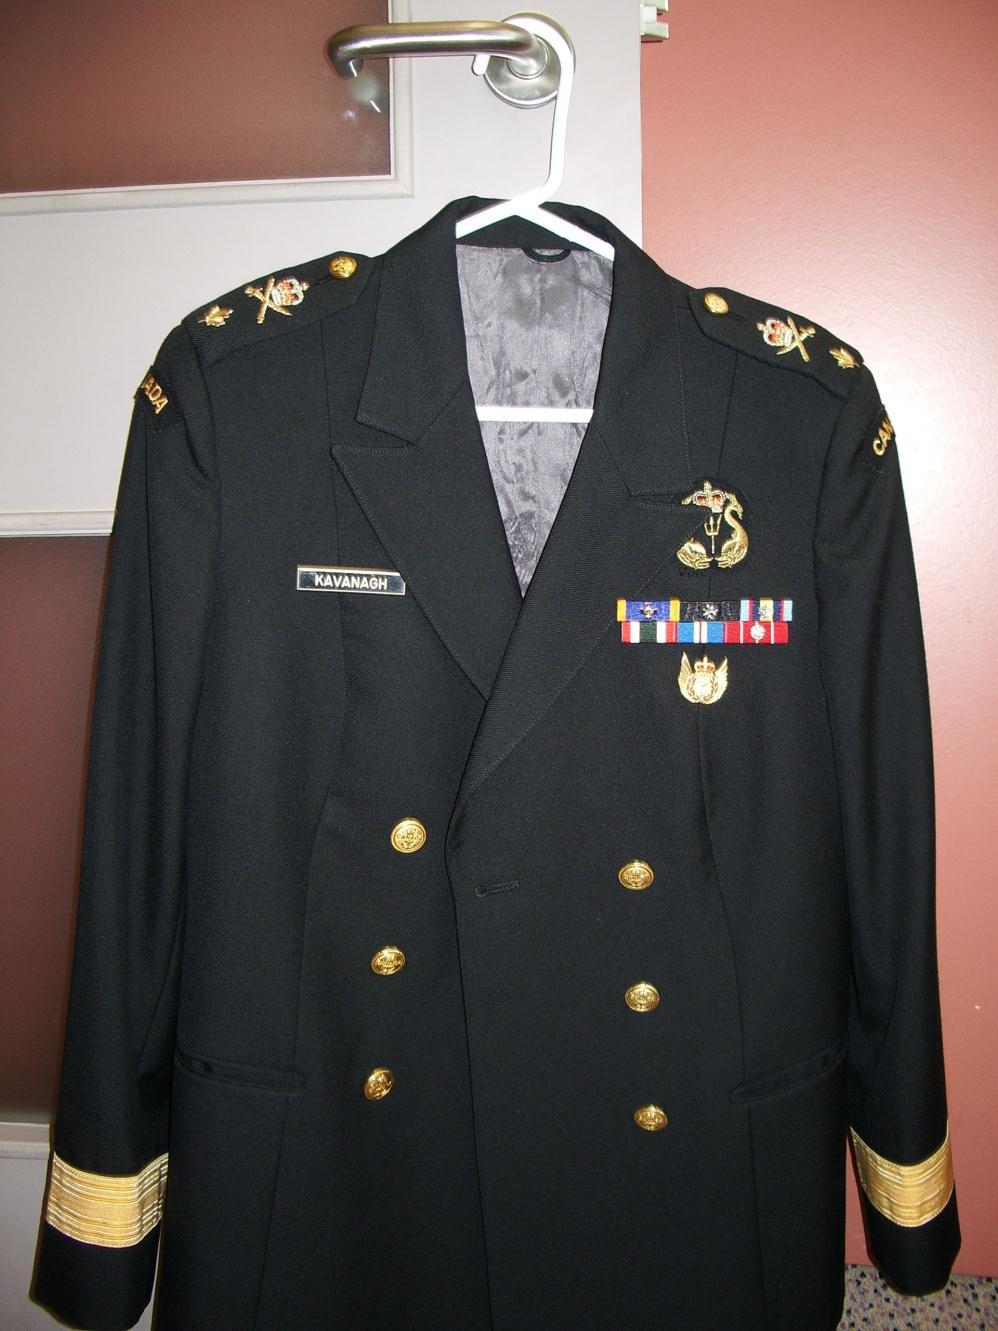 MCM315 TUNIC, NAVY, WITH ACCOUTREMENTS, CMDRE M.F.